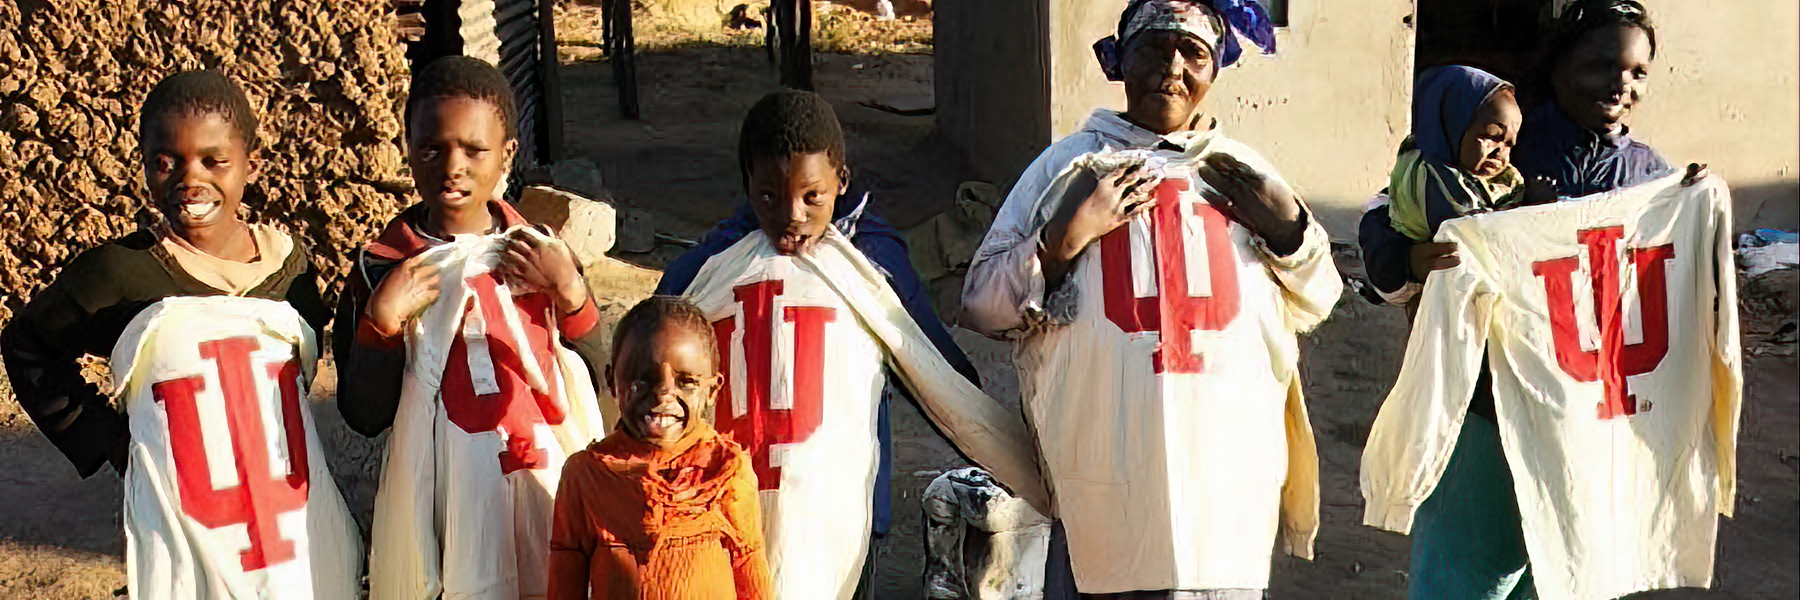 Members of the community at location of a study abroad program with IU shirts